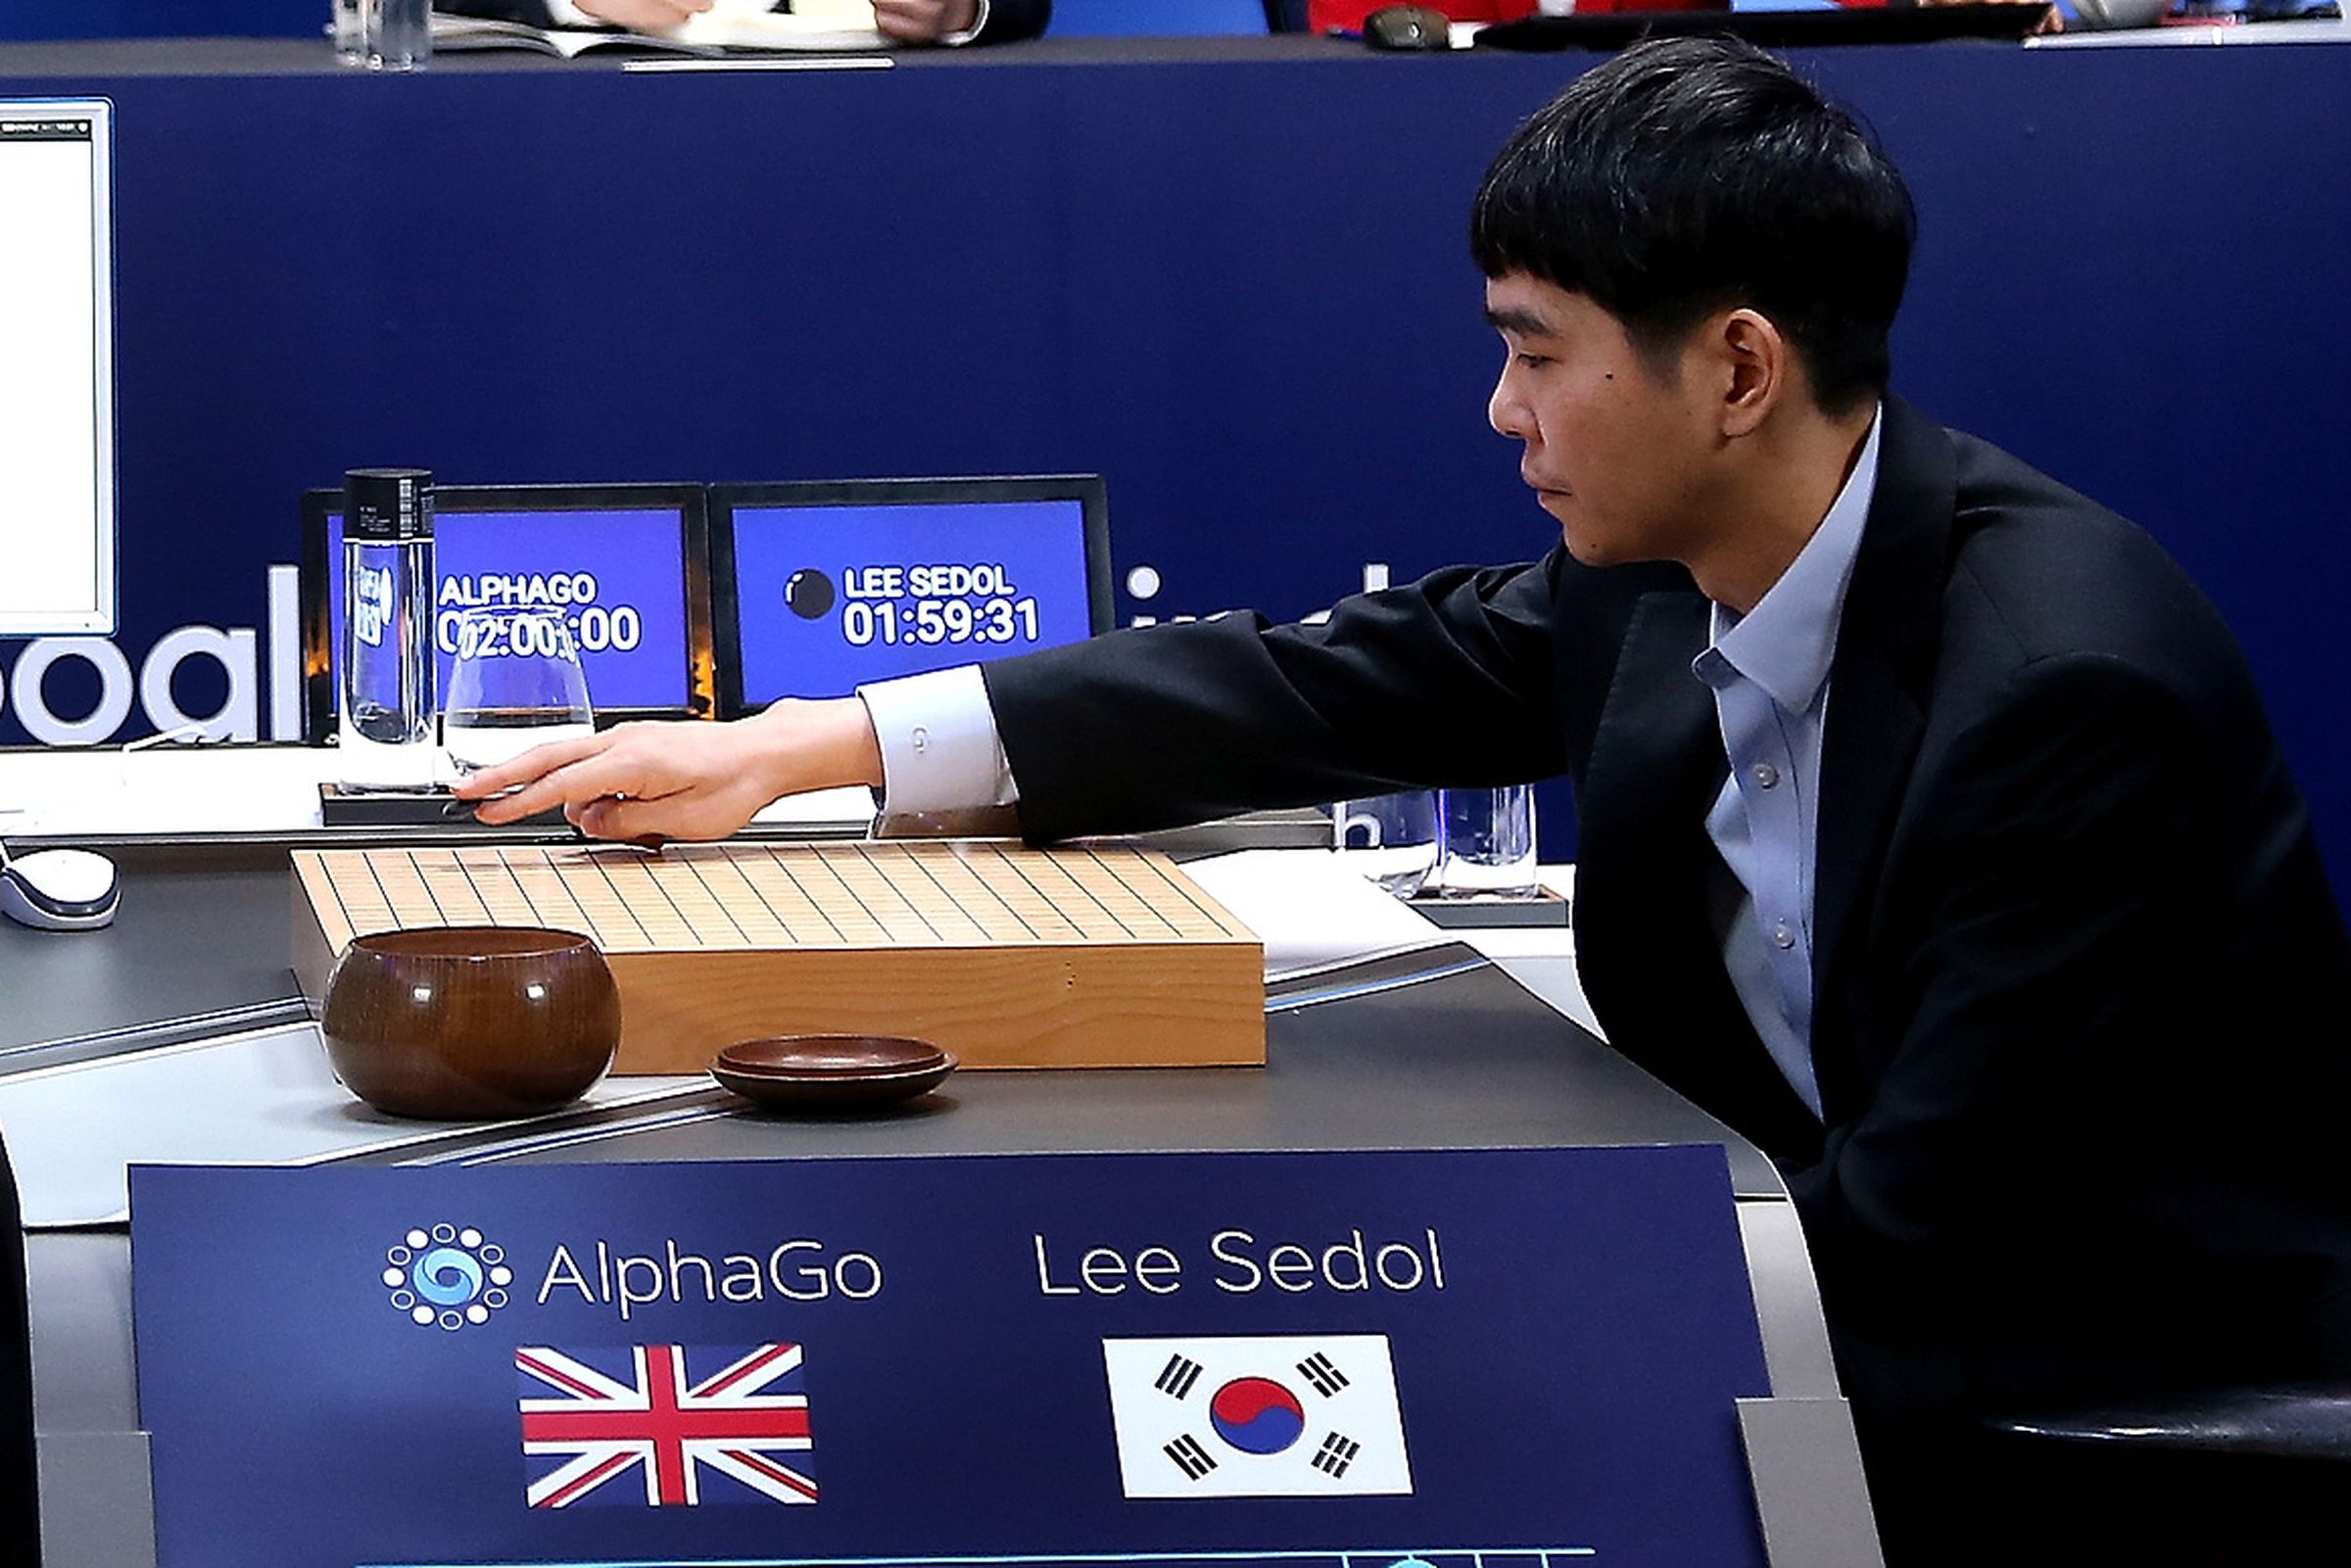 DeepMind’s AlphaGo program famously beat champion Lee Se-dol at the board game of Go in 2016. 